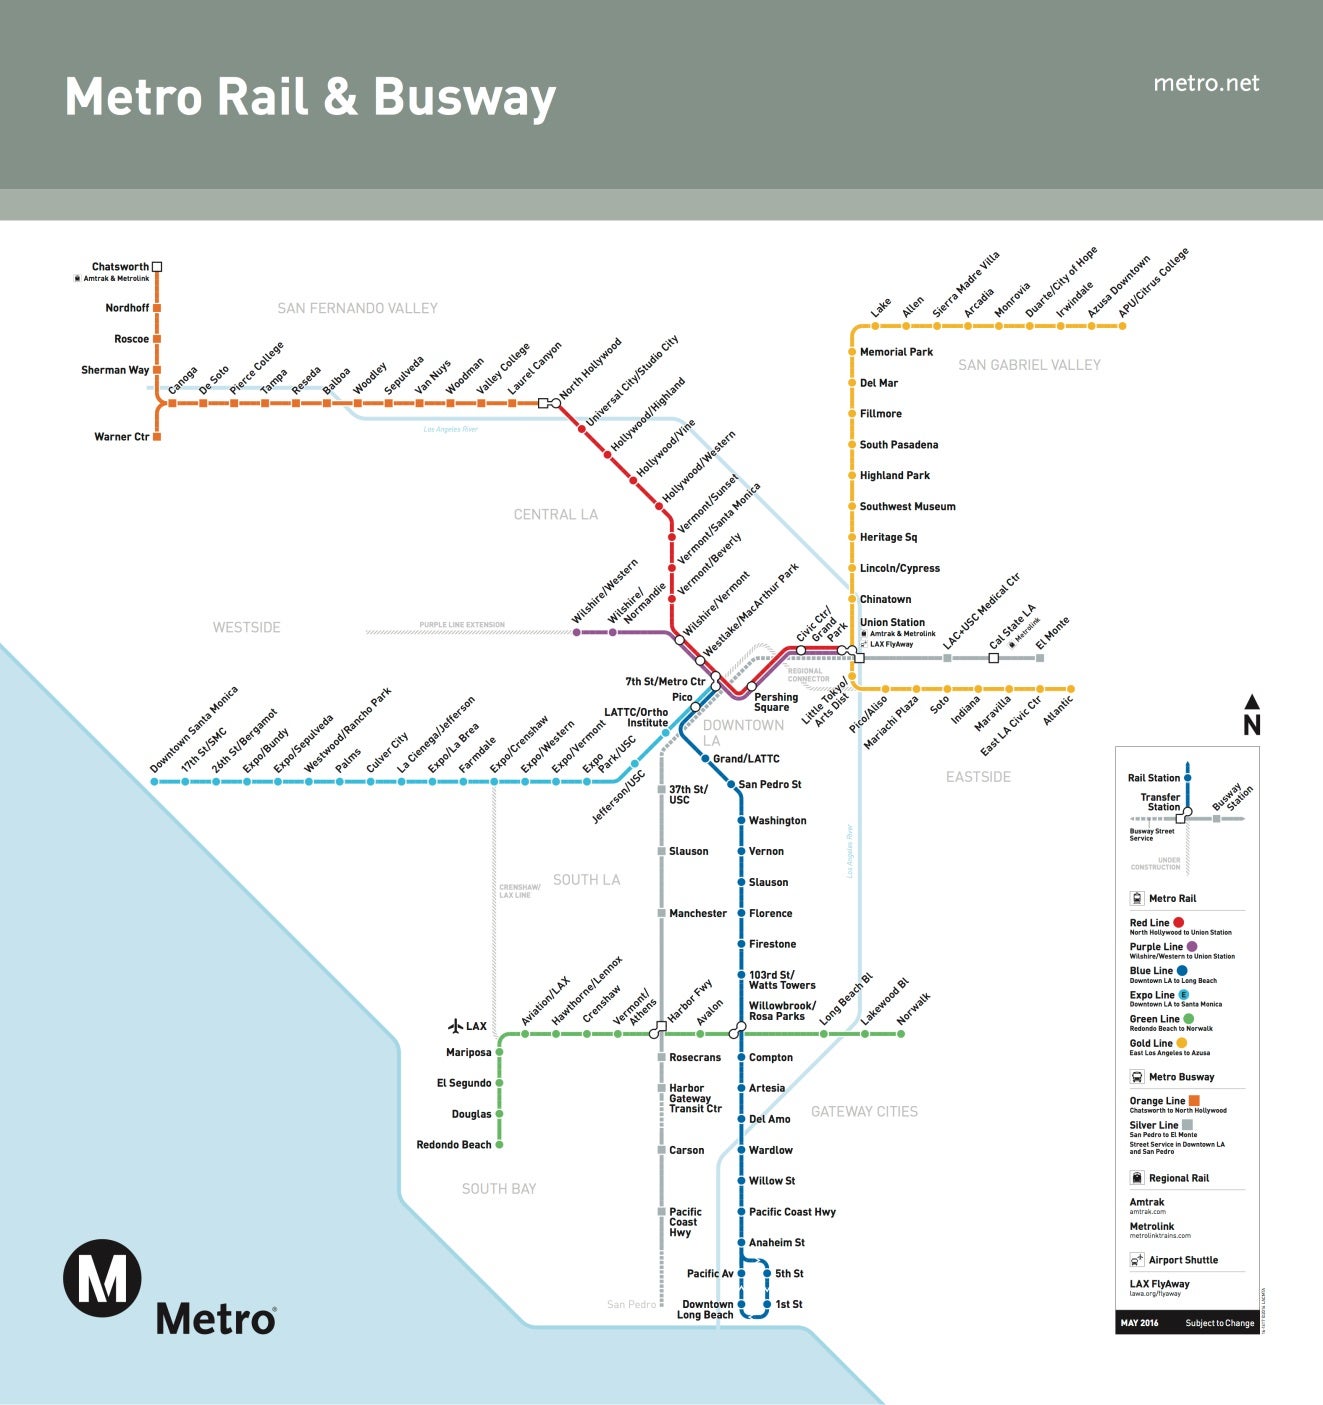 Map of LA Metro's Rail and Busway